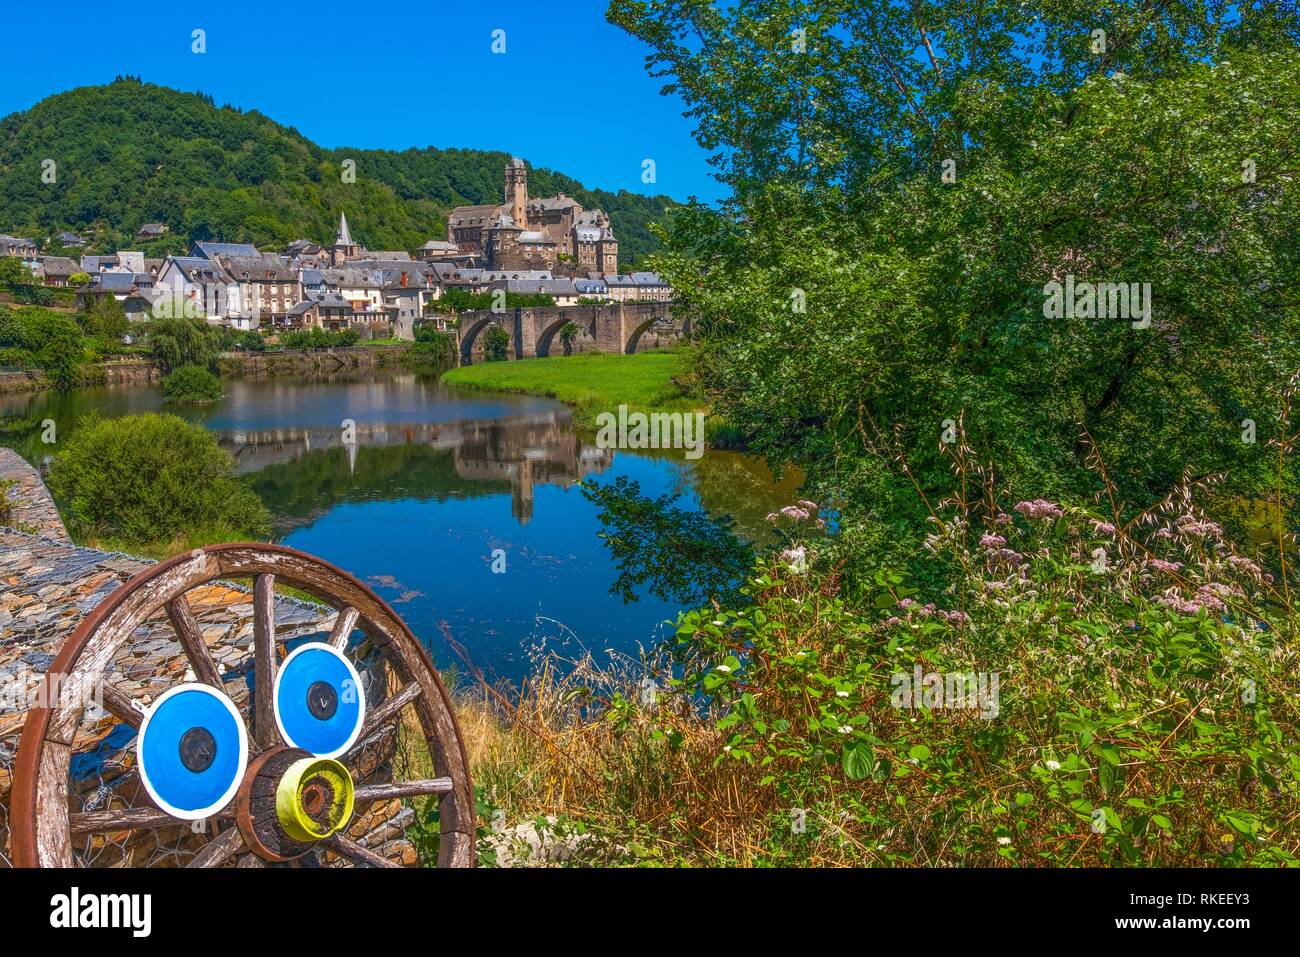 France, Occitanie, Aveyron, Estaing (Occitan: Estanh) is a commune in the Aveyron department in southern France. Located in the north of the Aveyron Stock Photo